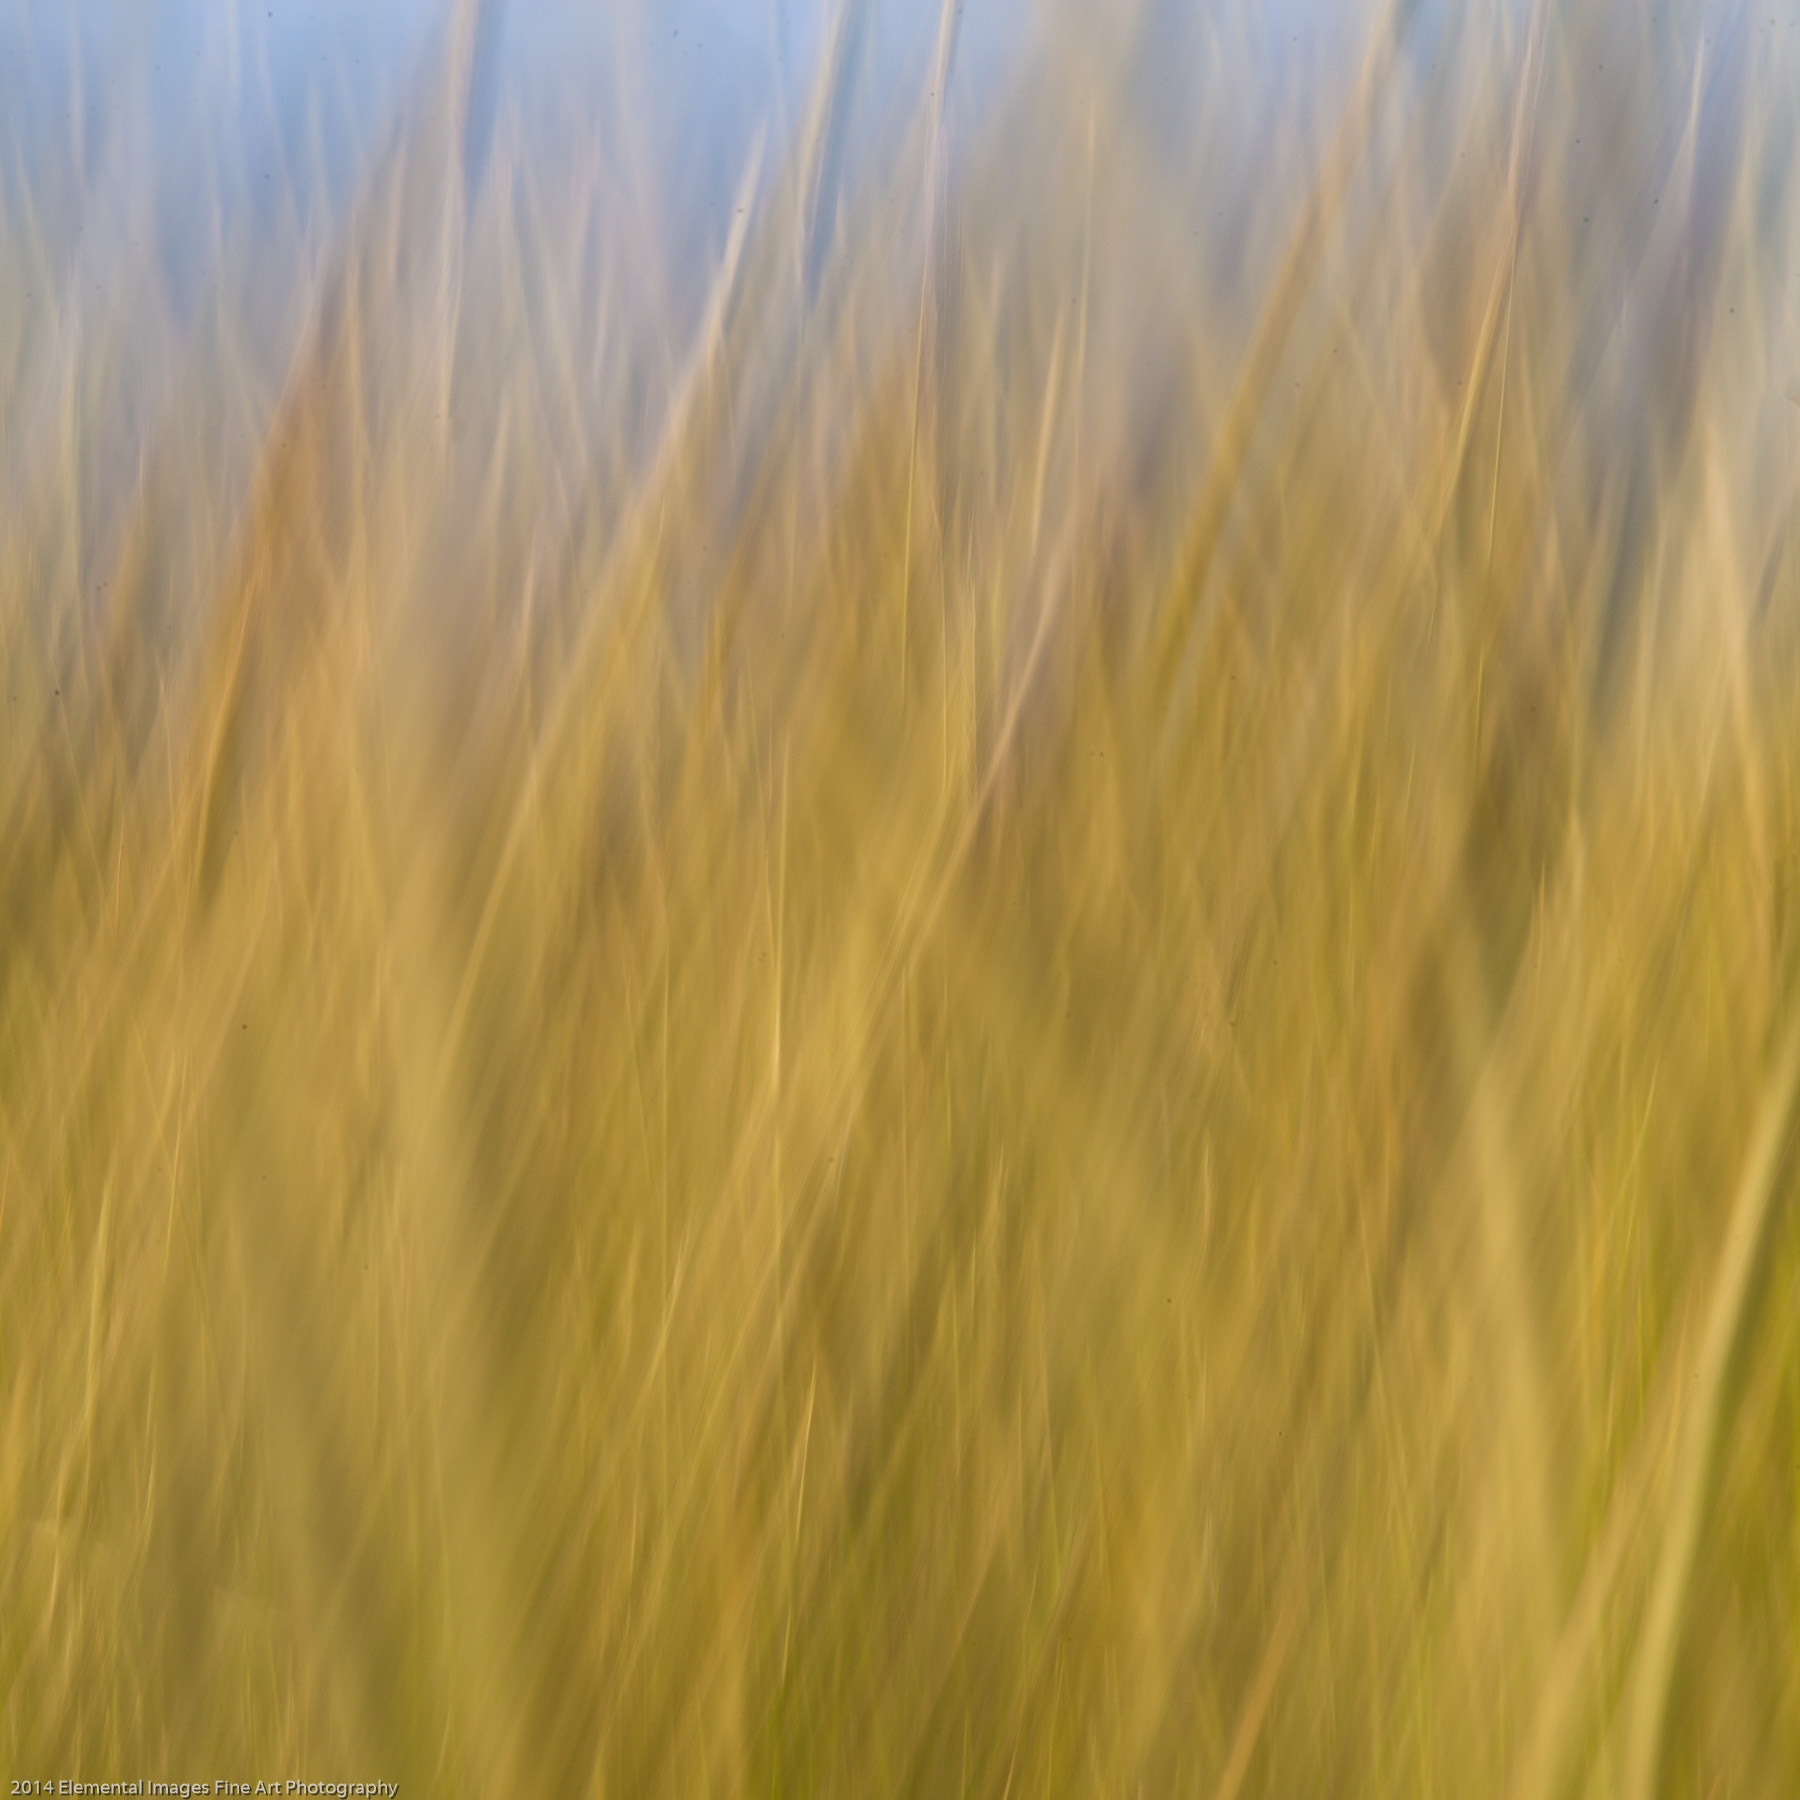 Grasses CIX | The Palouse | WA | USA - © 2014 Elemental Images Fine Art Photography - All Rights Reserved Worldwide